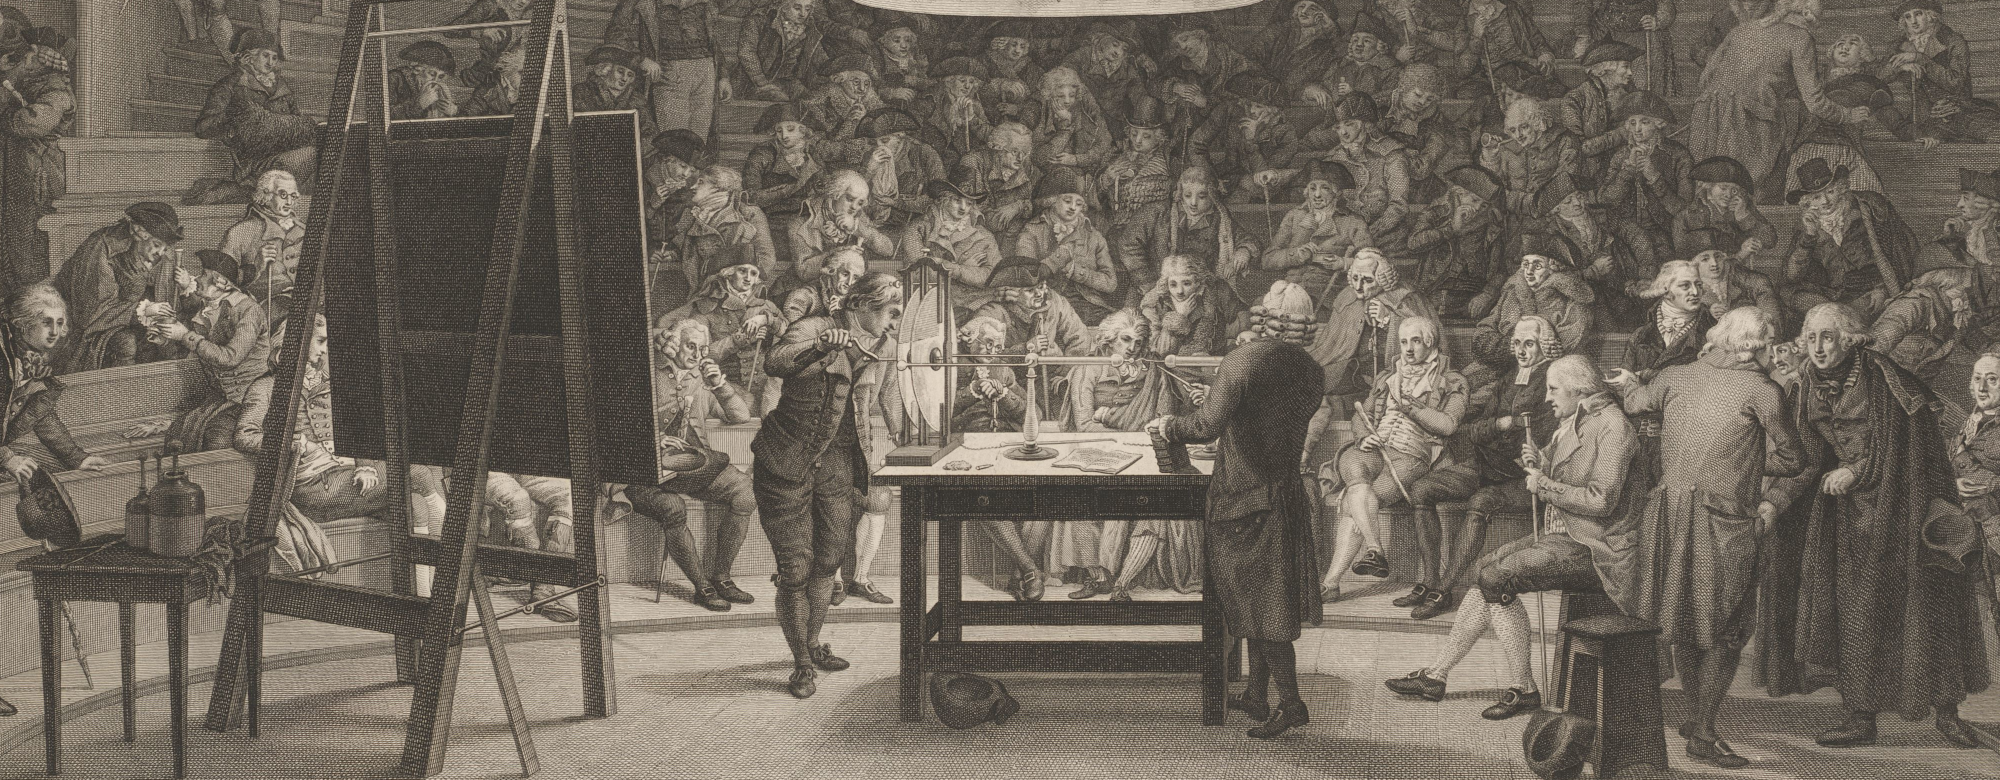 Etching depicting the demonstration of the electrifying machine in the Hall of Physics in the building of the Felix Meritis society in Amsterdam, inaugurated in 1789.